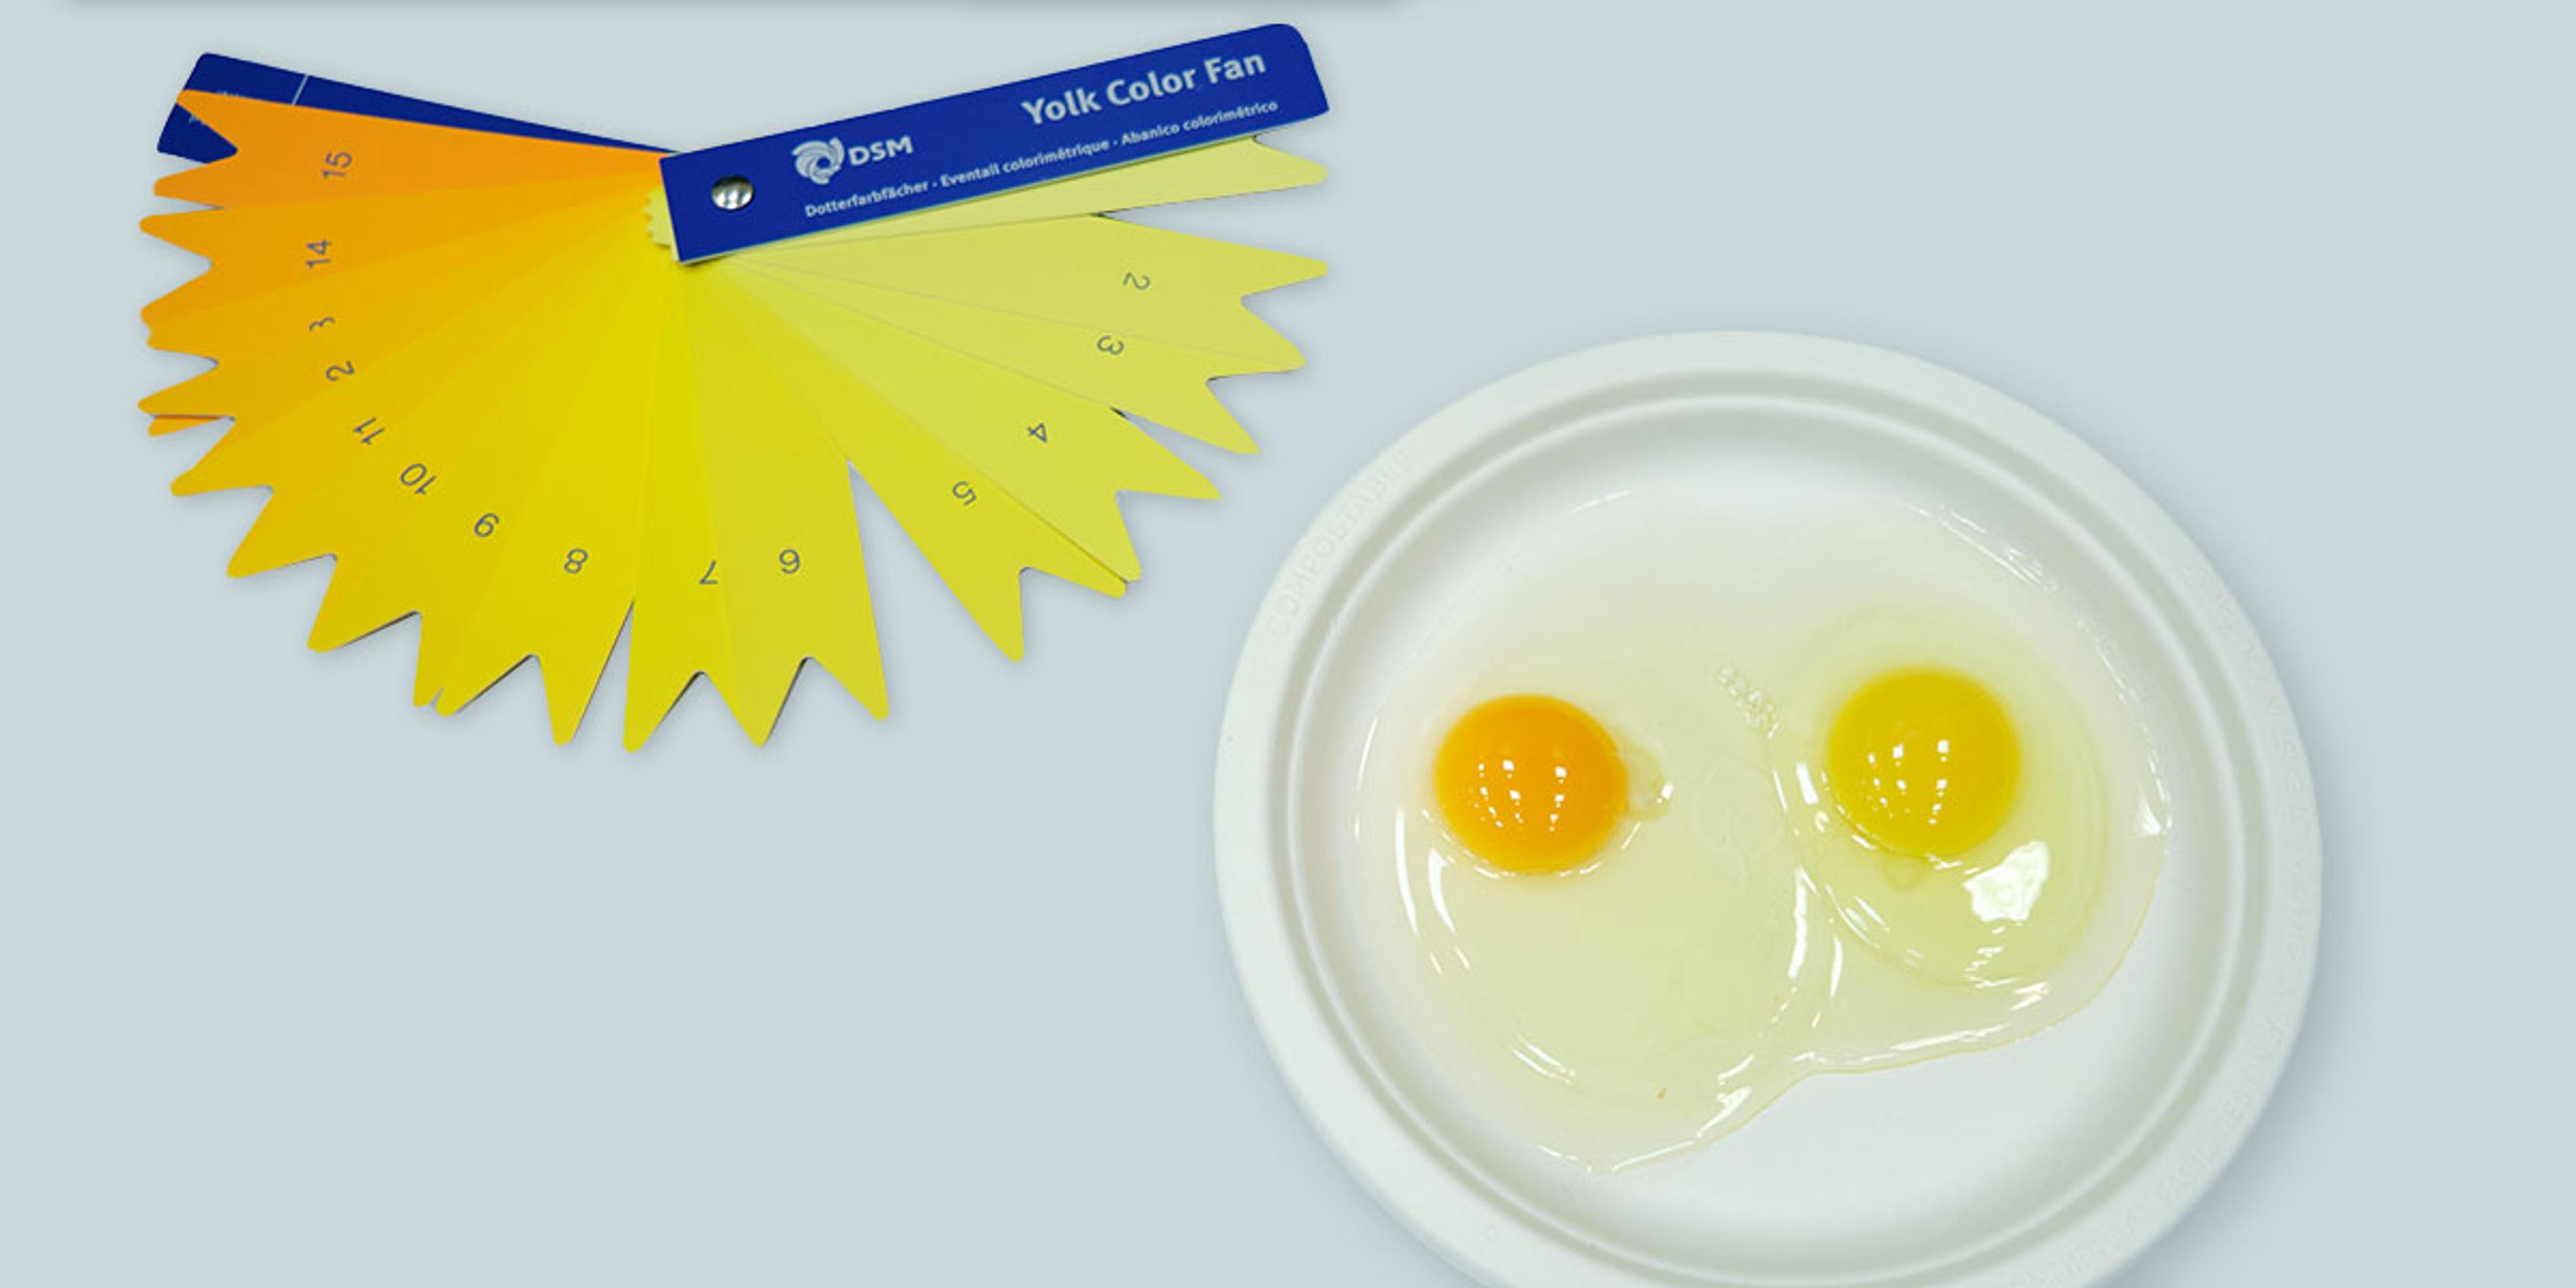 An egg yolk color fan placed next to a plate of eggs.